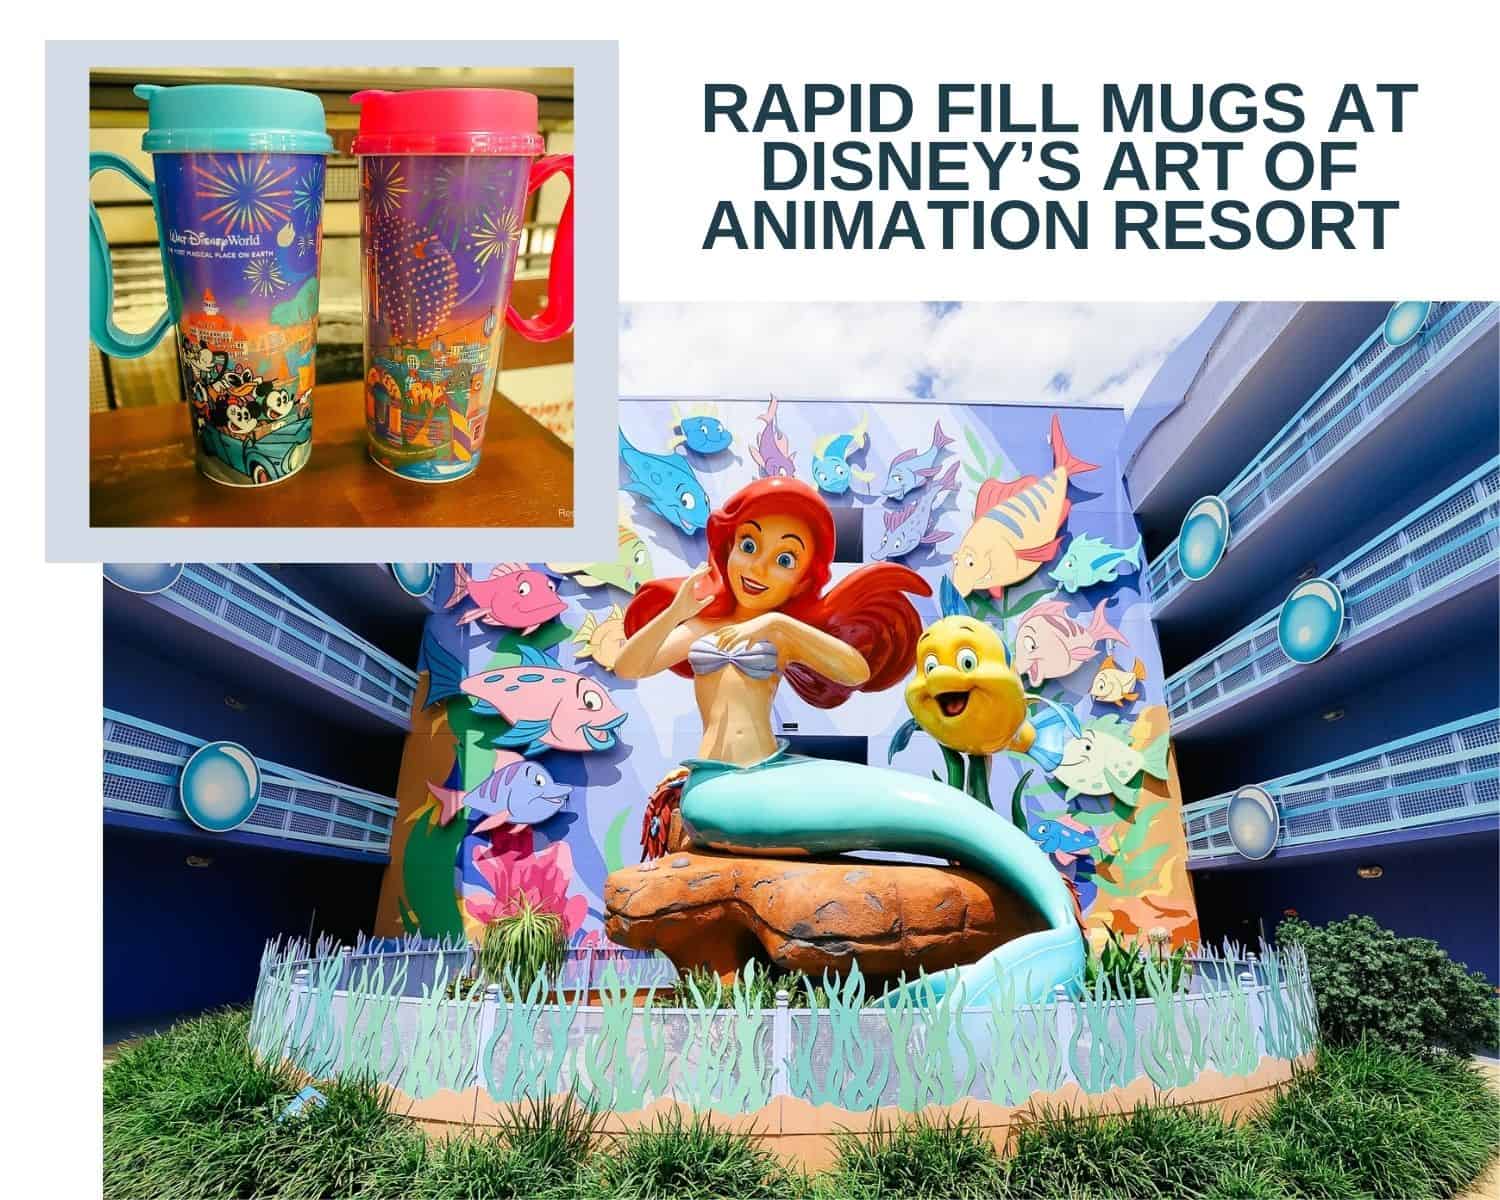 Disney’s Art of Animation Resort Rapid Fill Mugs (With Locations and Beverages)